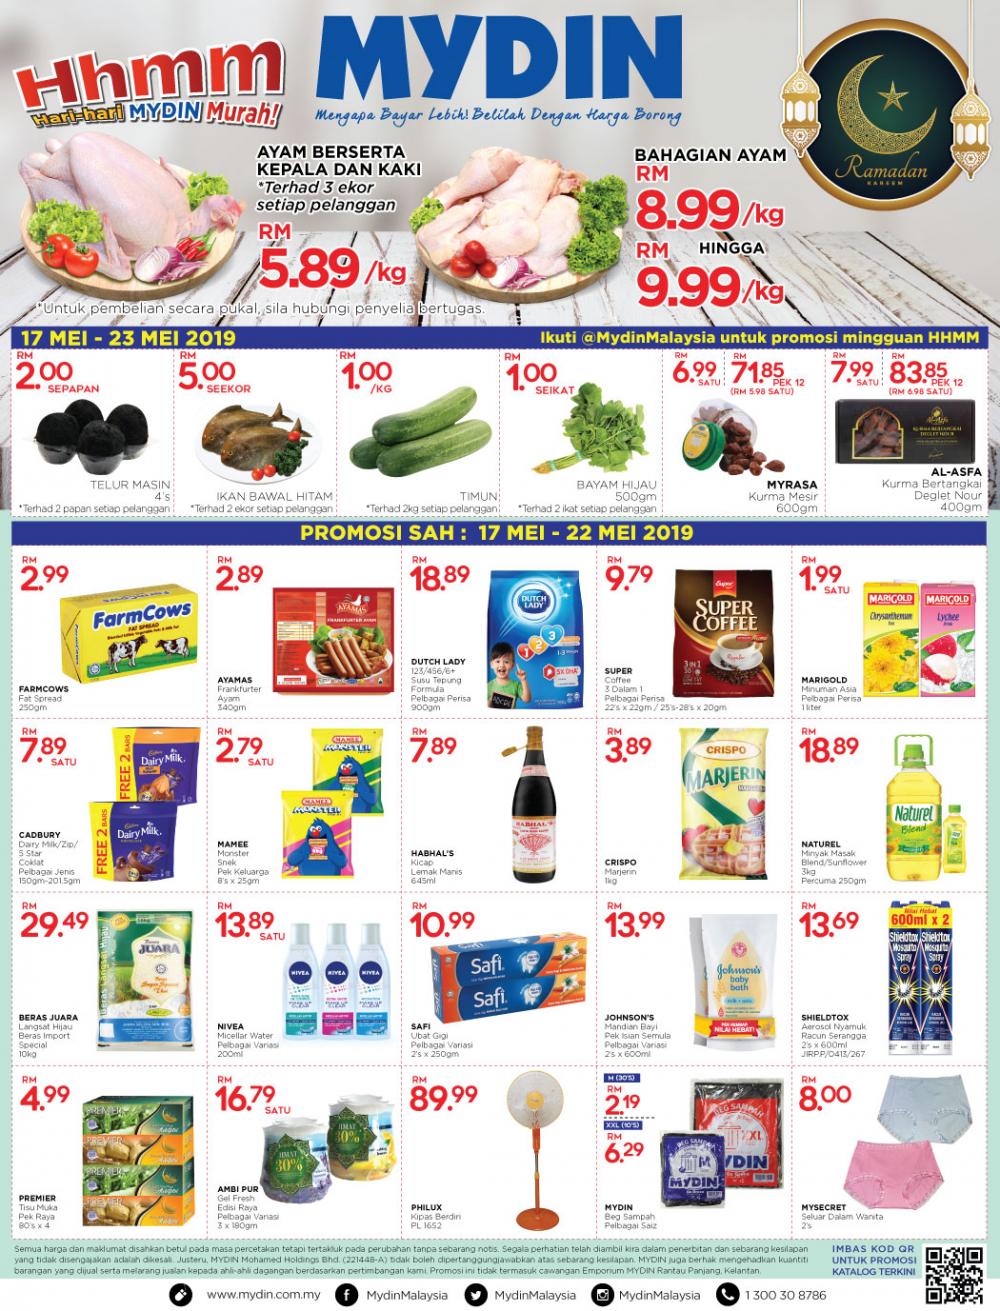 MYDIN Weekend Promotion (17 May 2019 - 22 May 2019)